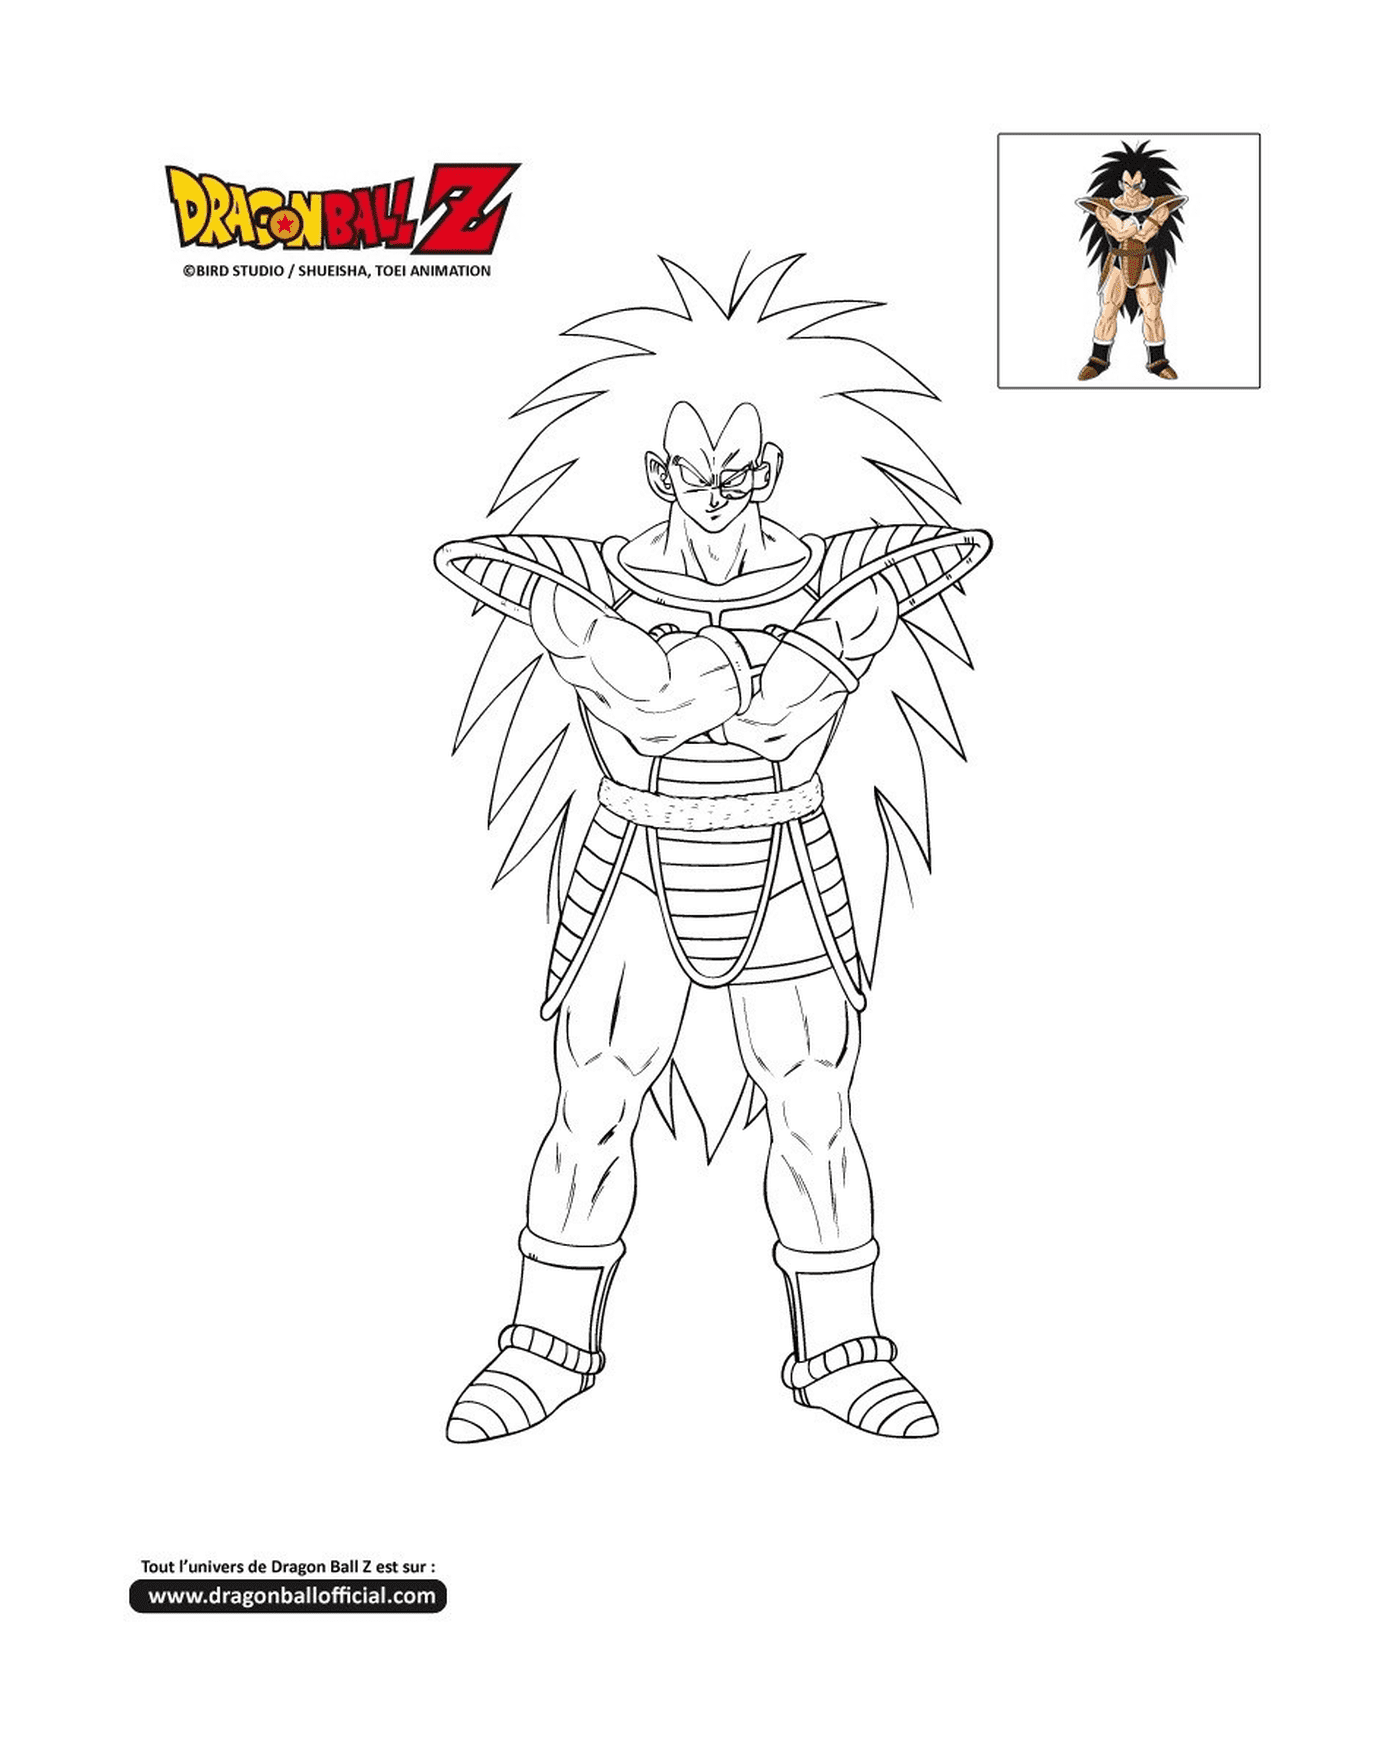  Raditz, a character from Dragon Ball Z 